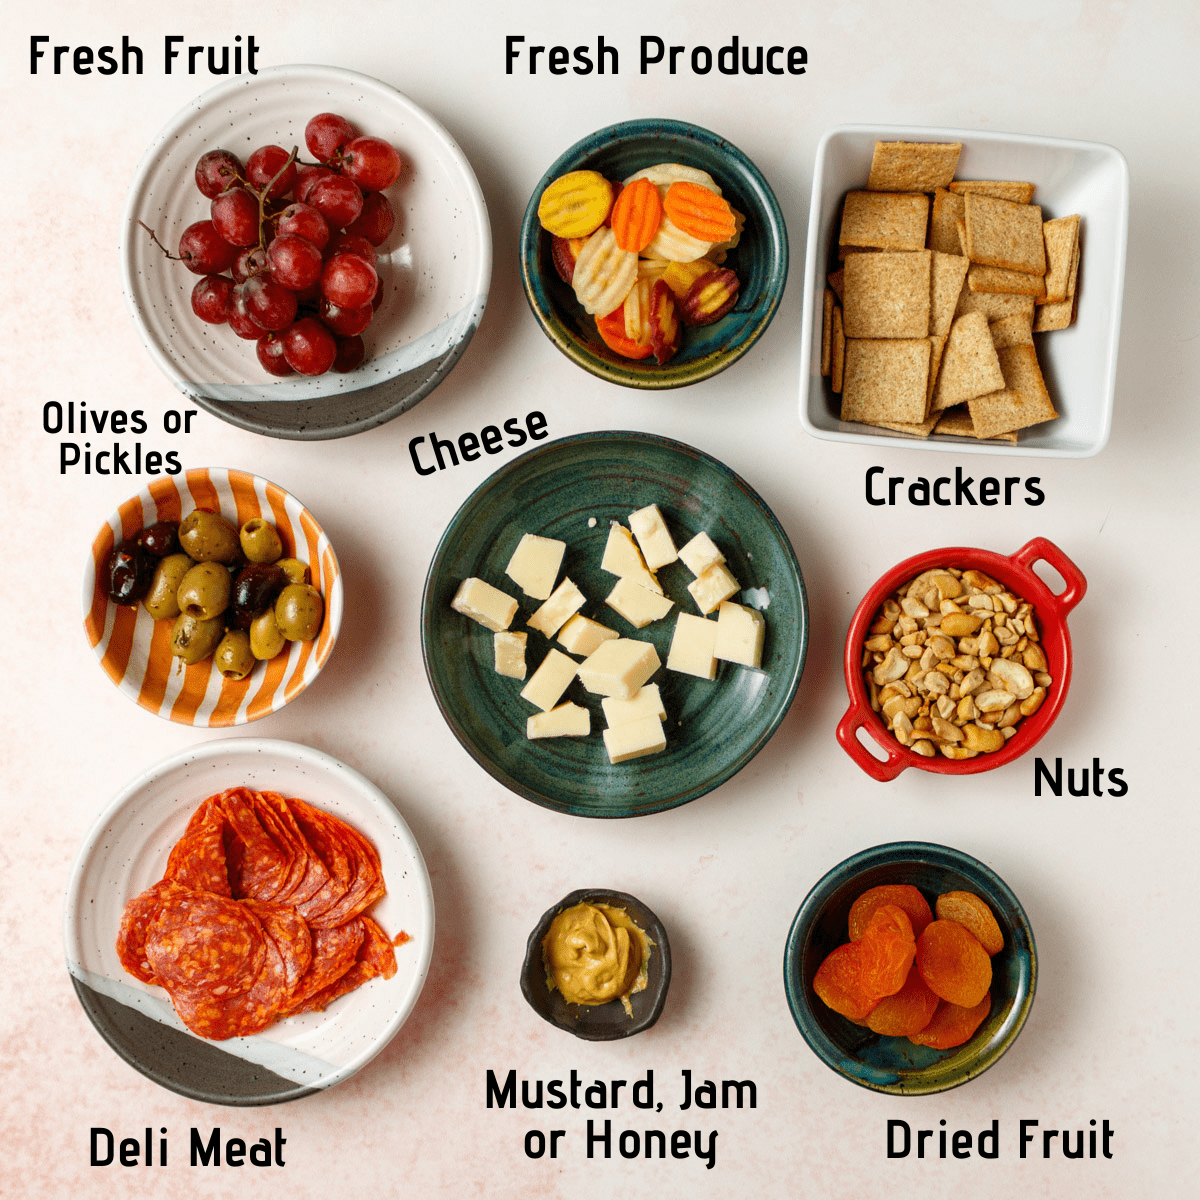 Separate ingredients labeled on a white and red speckled background. Grapes, carrots, crackers, olives, cheese, cashews, deli meat, mustard and dried apricots.